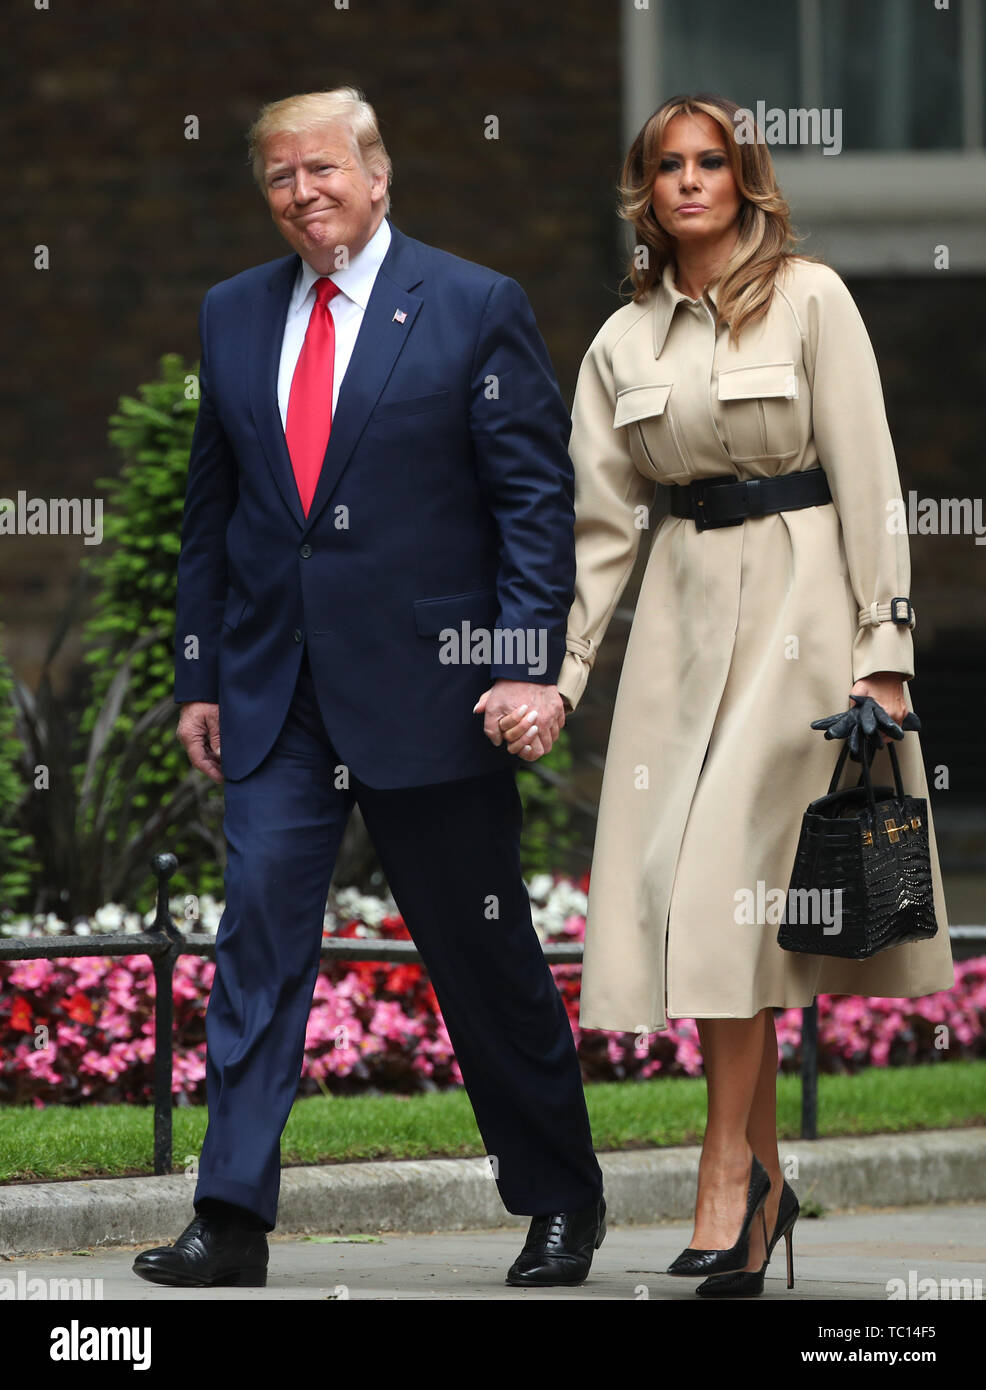 US President Donald Trump and first lady Melania Trump arrive in Downing  Street, London, on the second day of his state visit to the UK Stock Photo  - Alamy